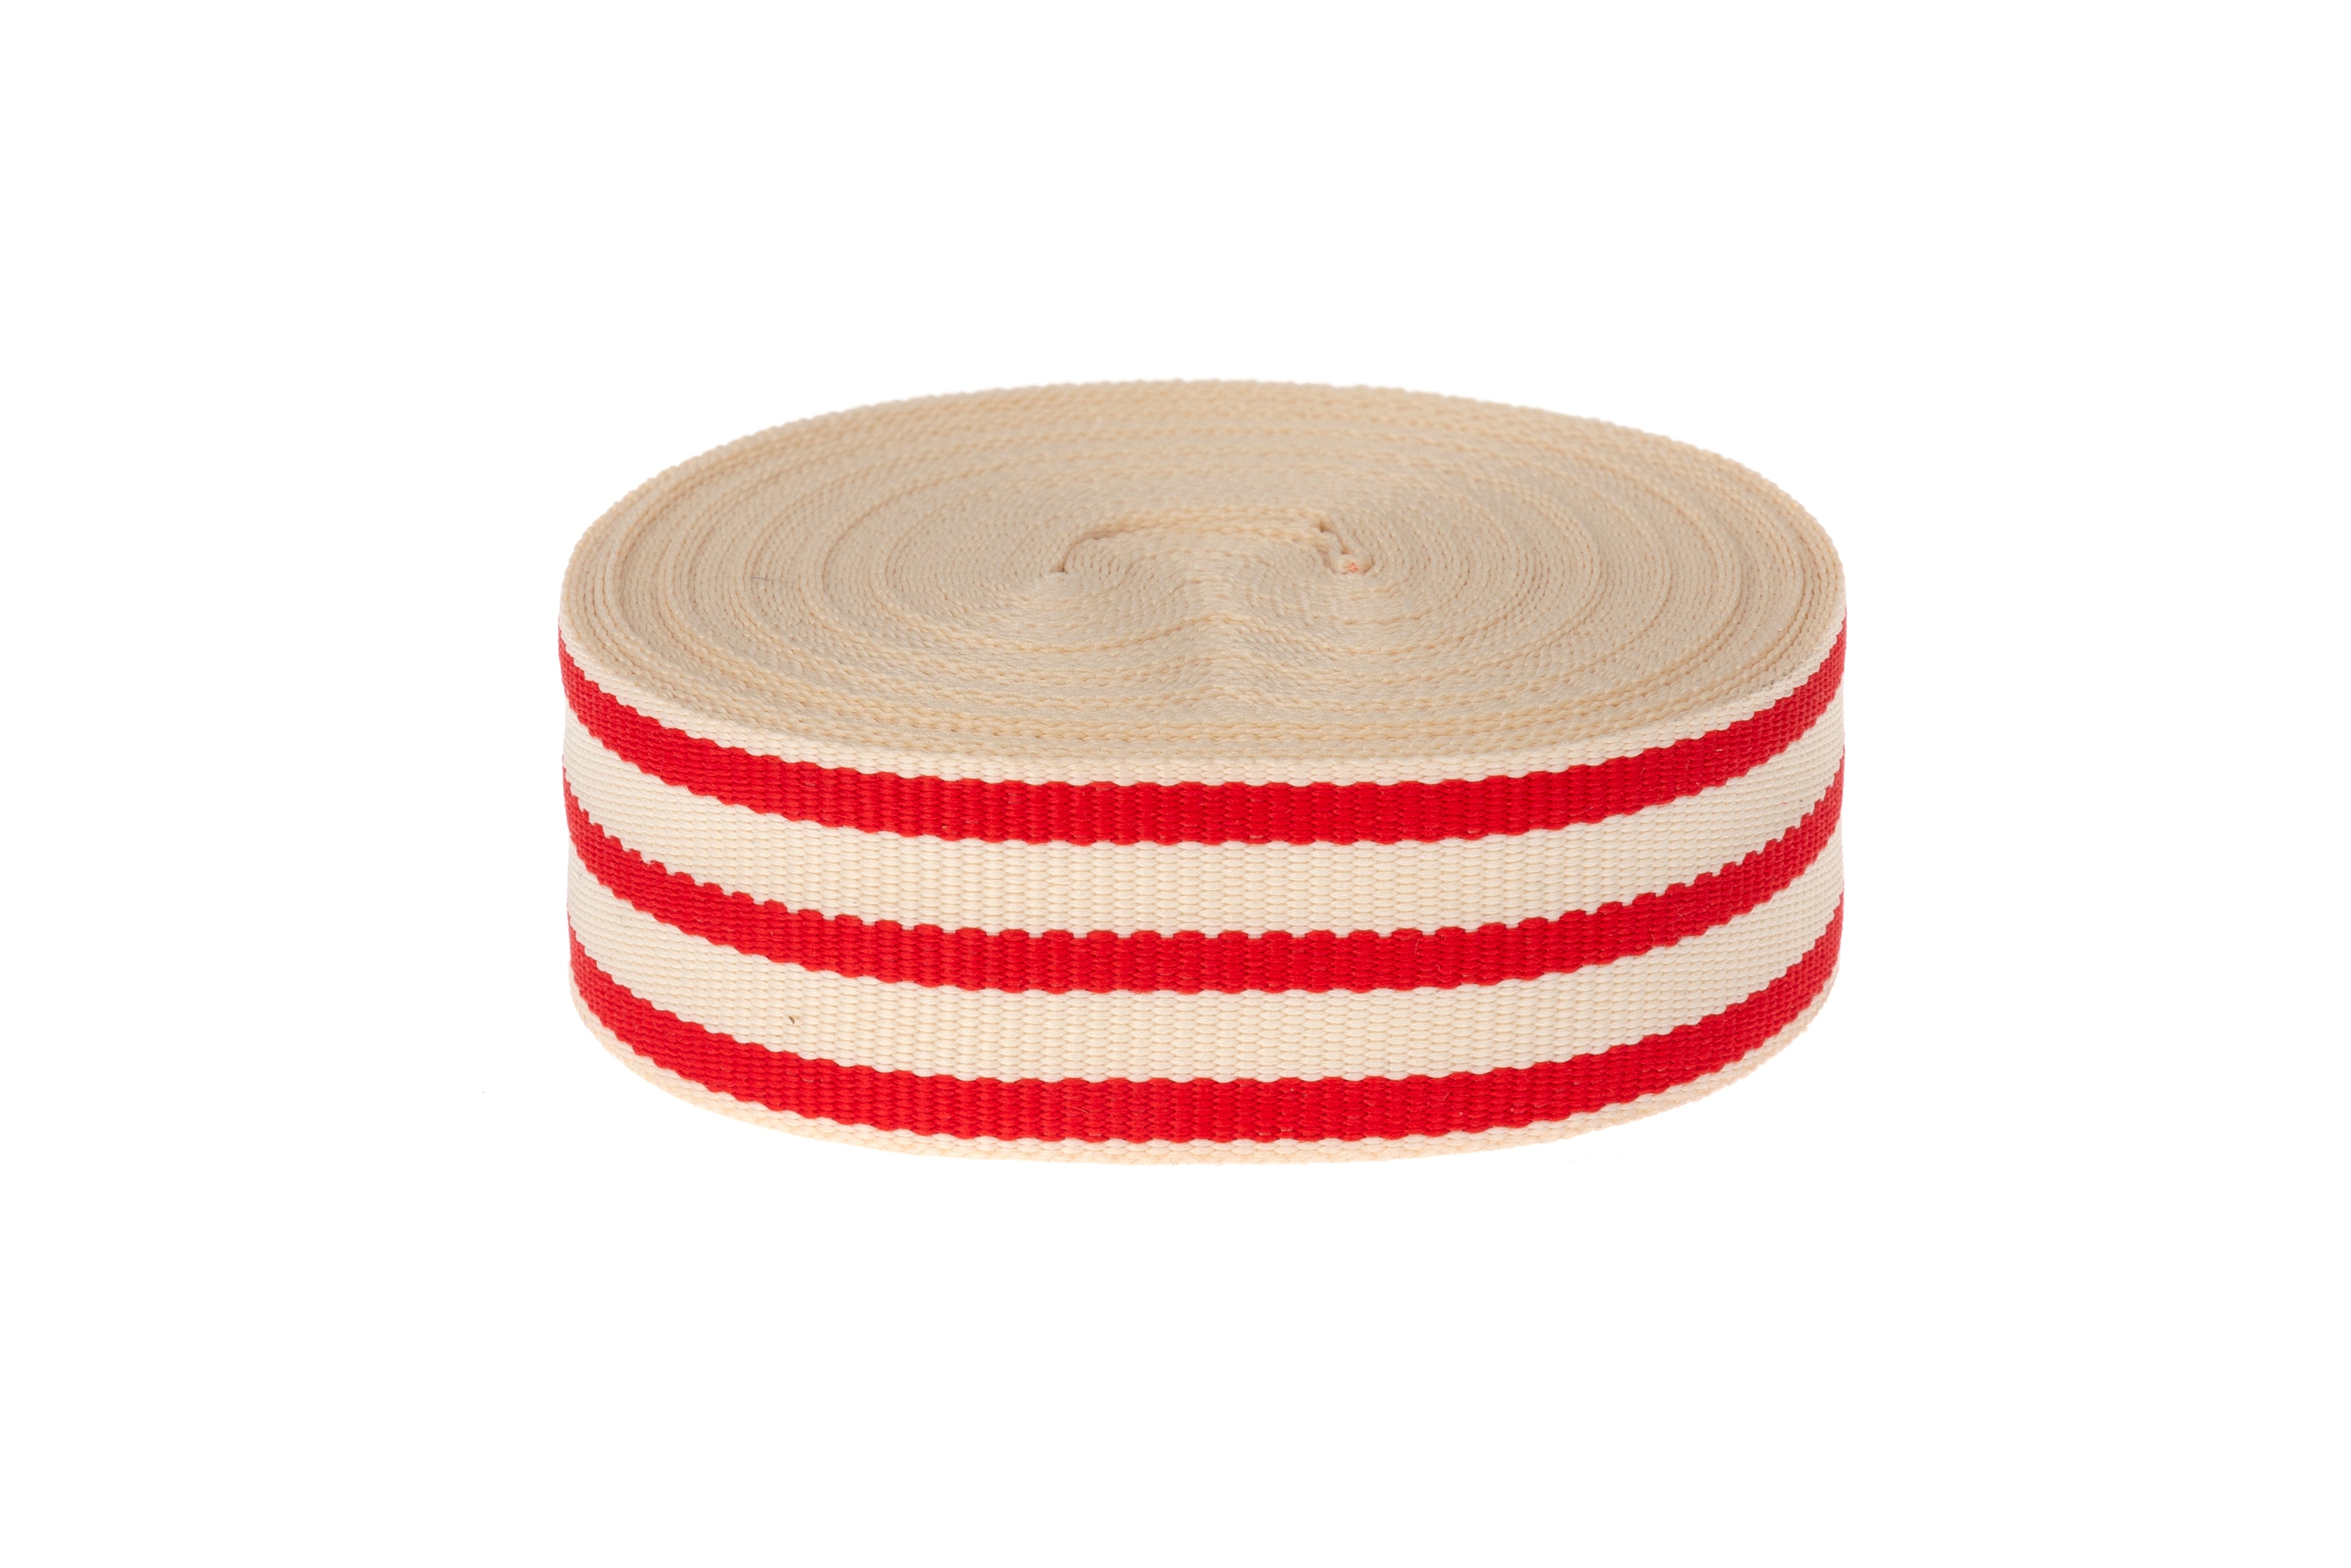 10m x 20mm with Red and Cream Ribbon - Sophies Ribbons